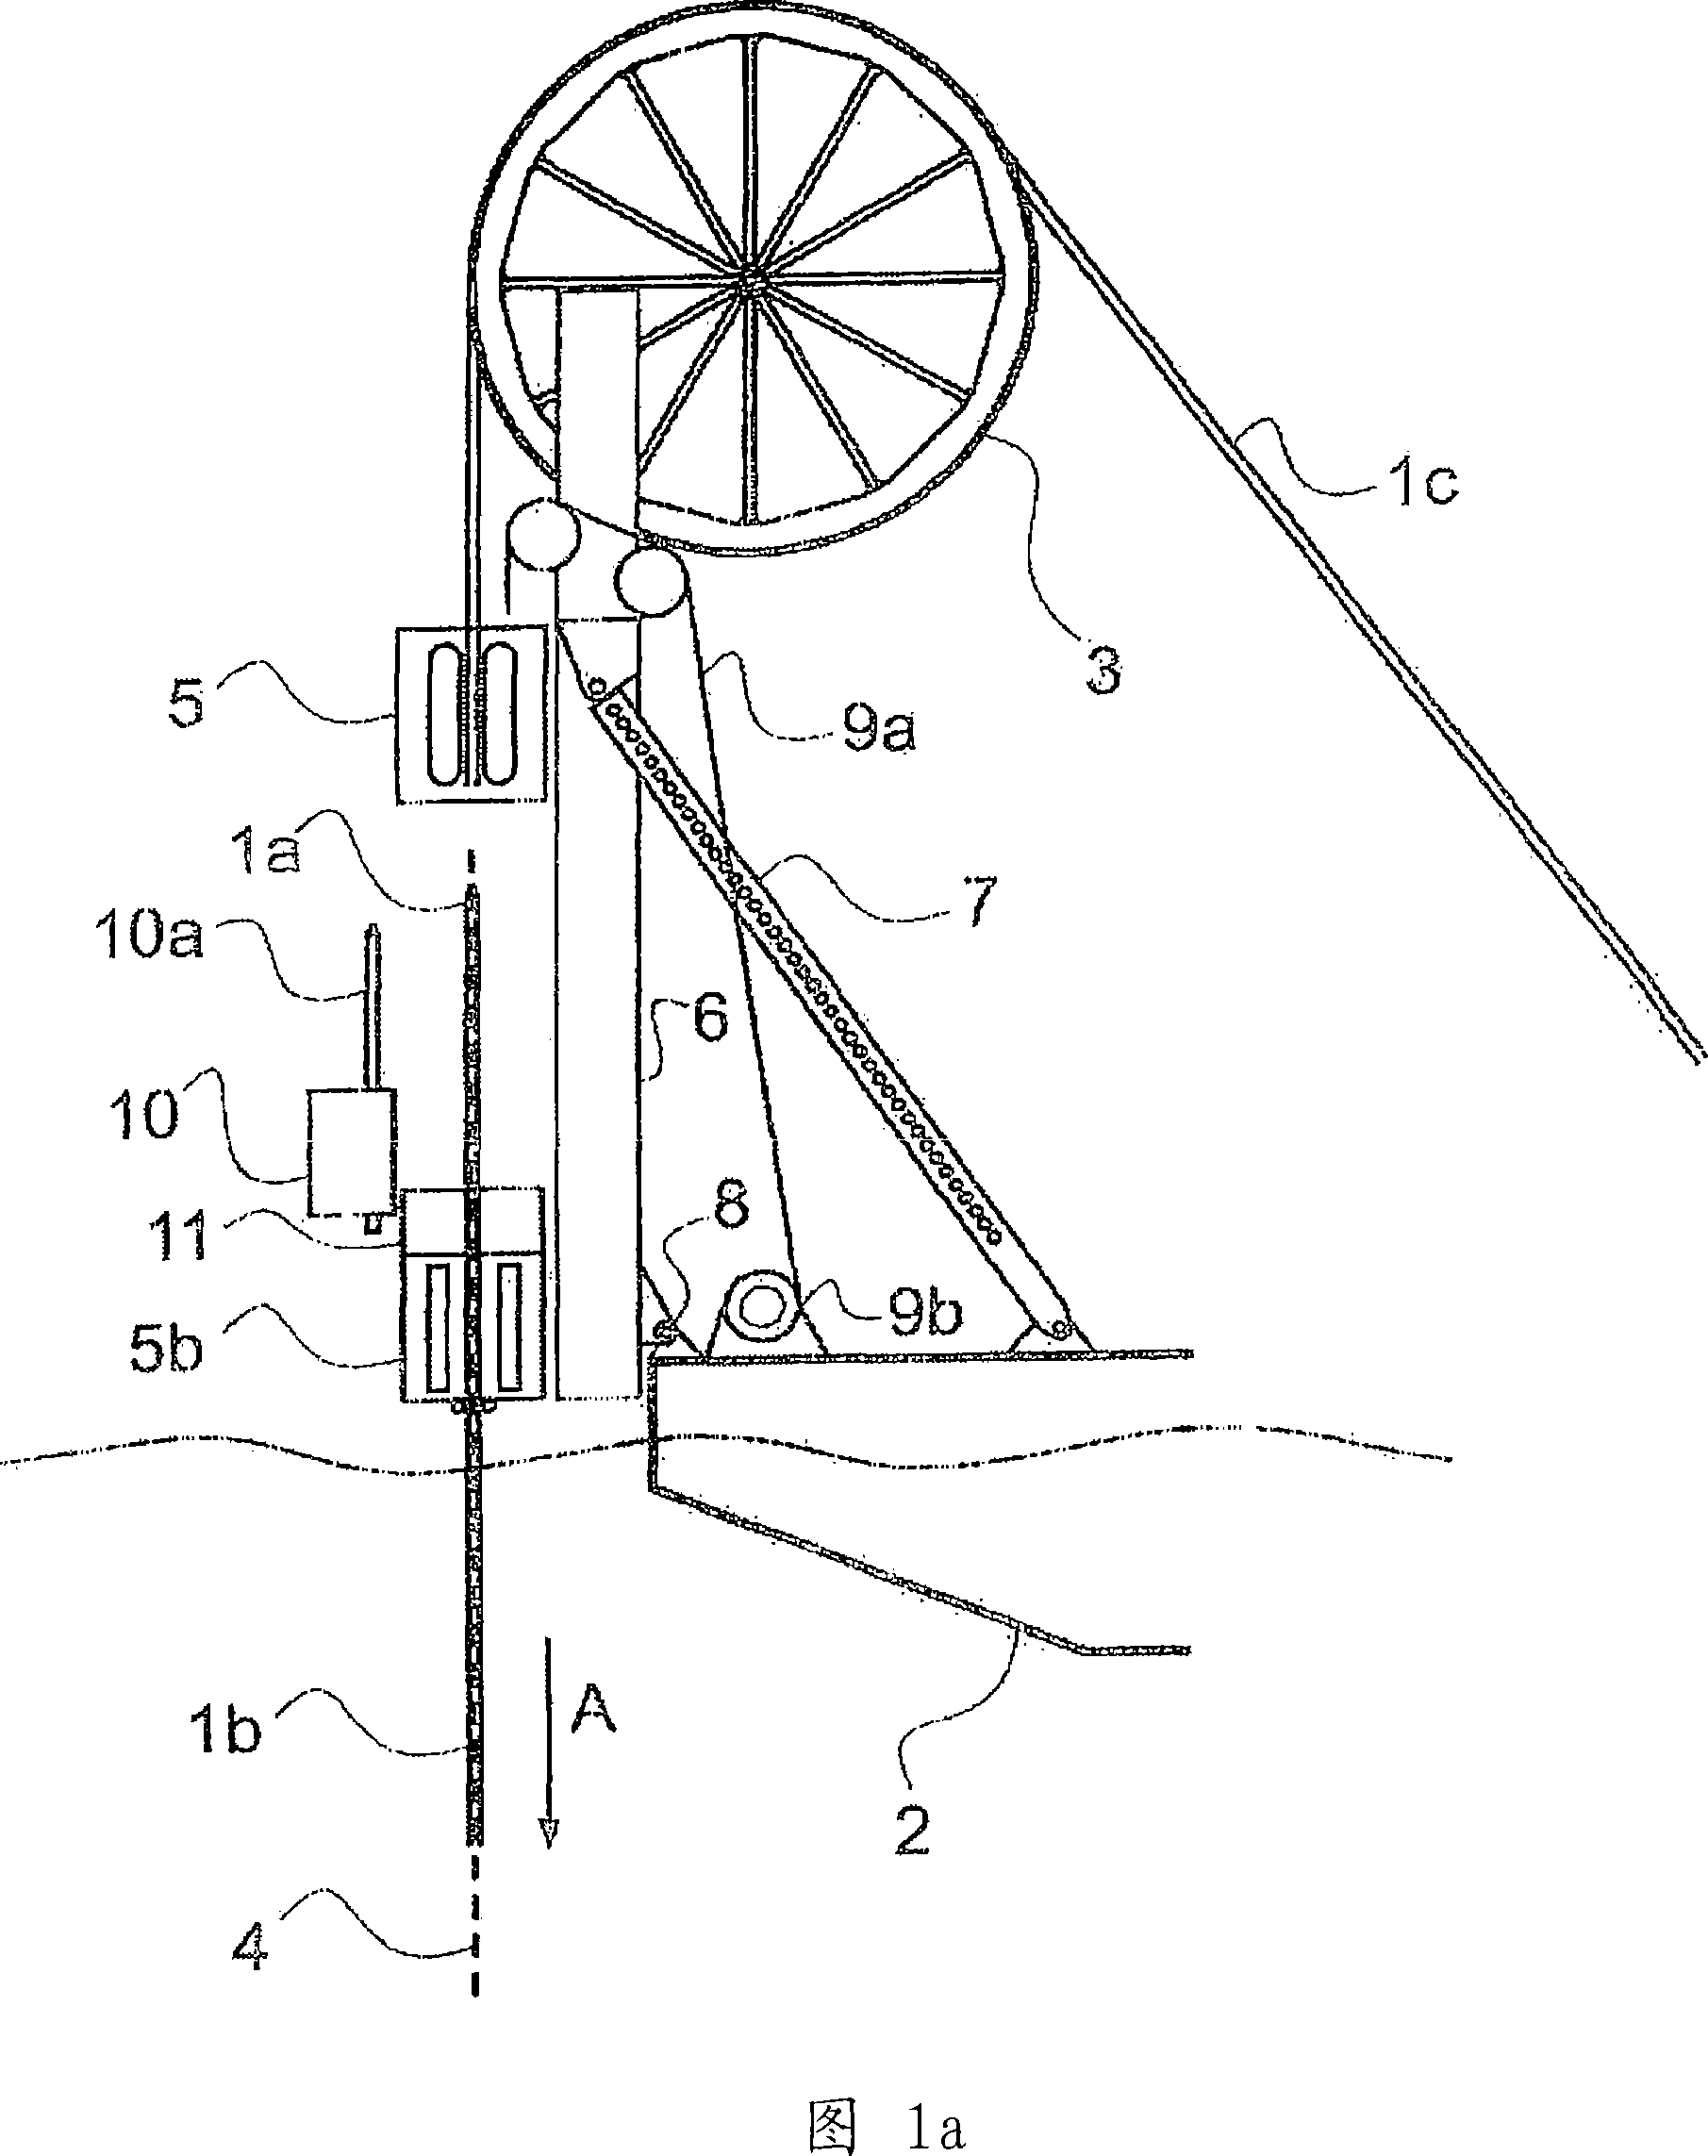 Sea pipe distribution system and method of off-land pipeline with one or more fittings